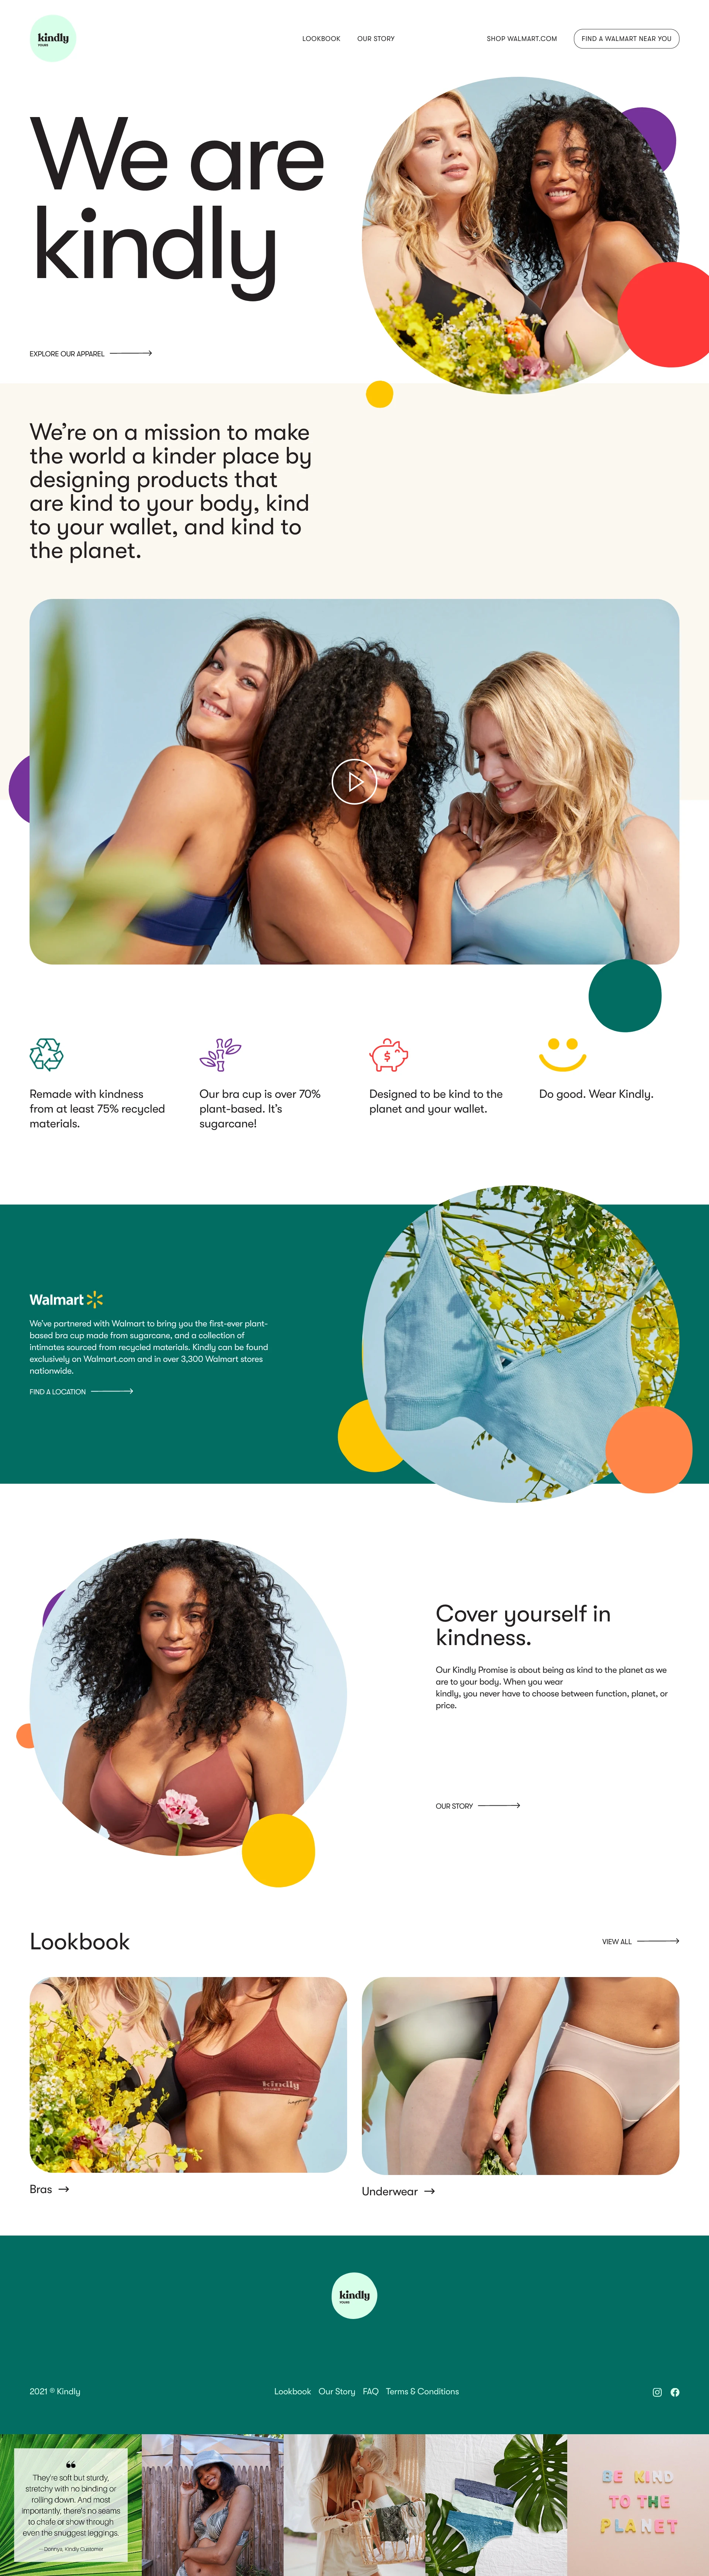 Kindly Landing Page Example: We’re on a mission to make the world a kinder place by designing products that are kind to your body, kind to your wallet, and kind to the planet.